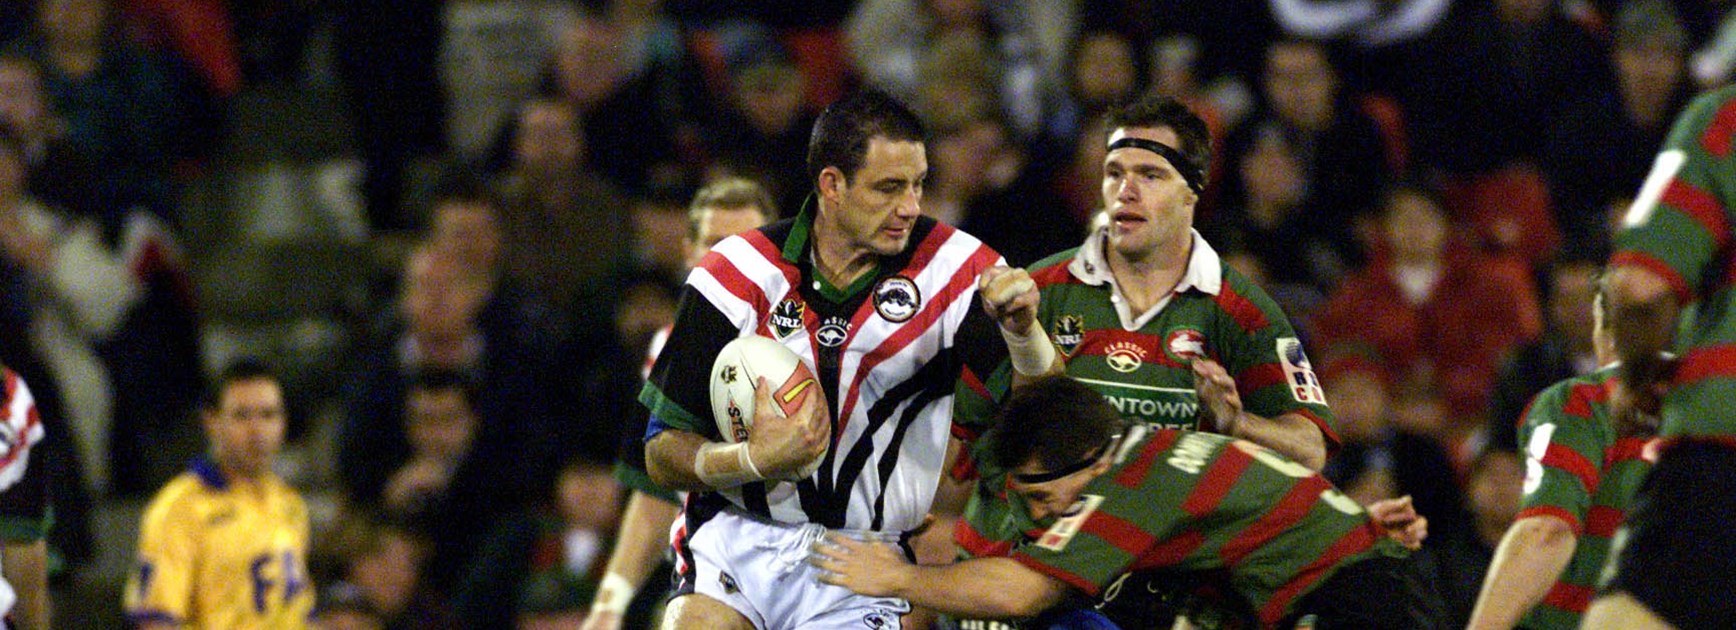 Mark Geyer playing for the Panthers.